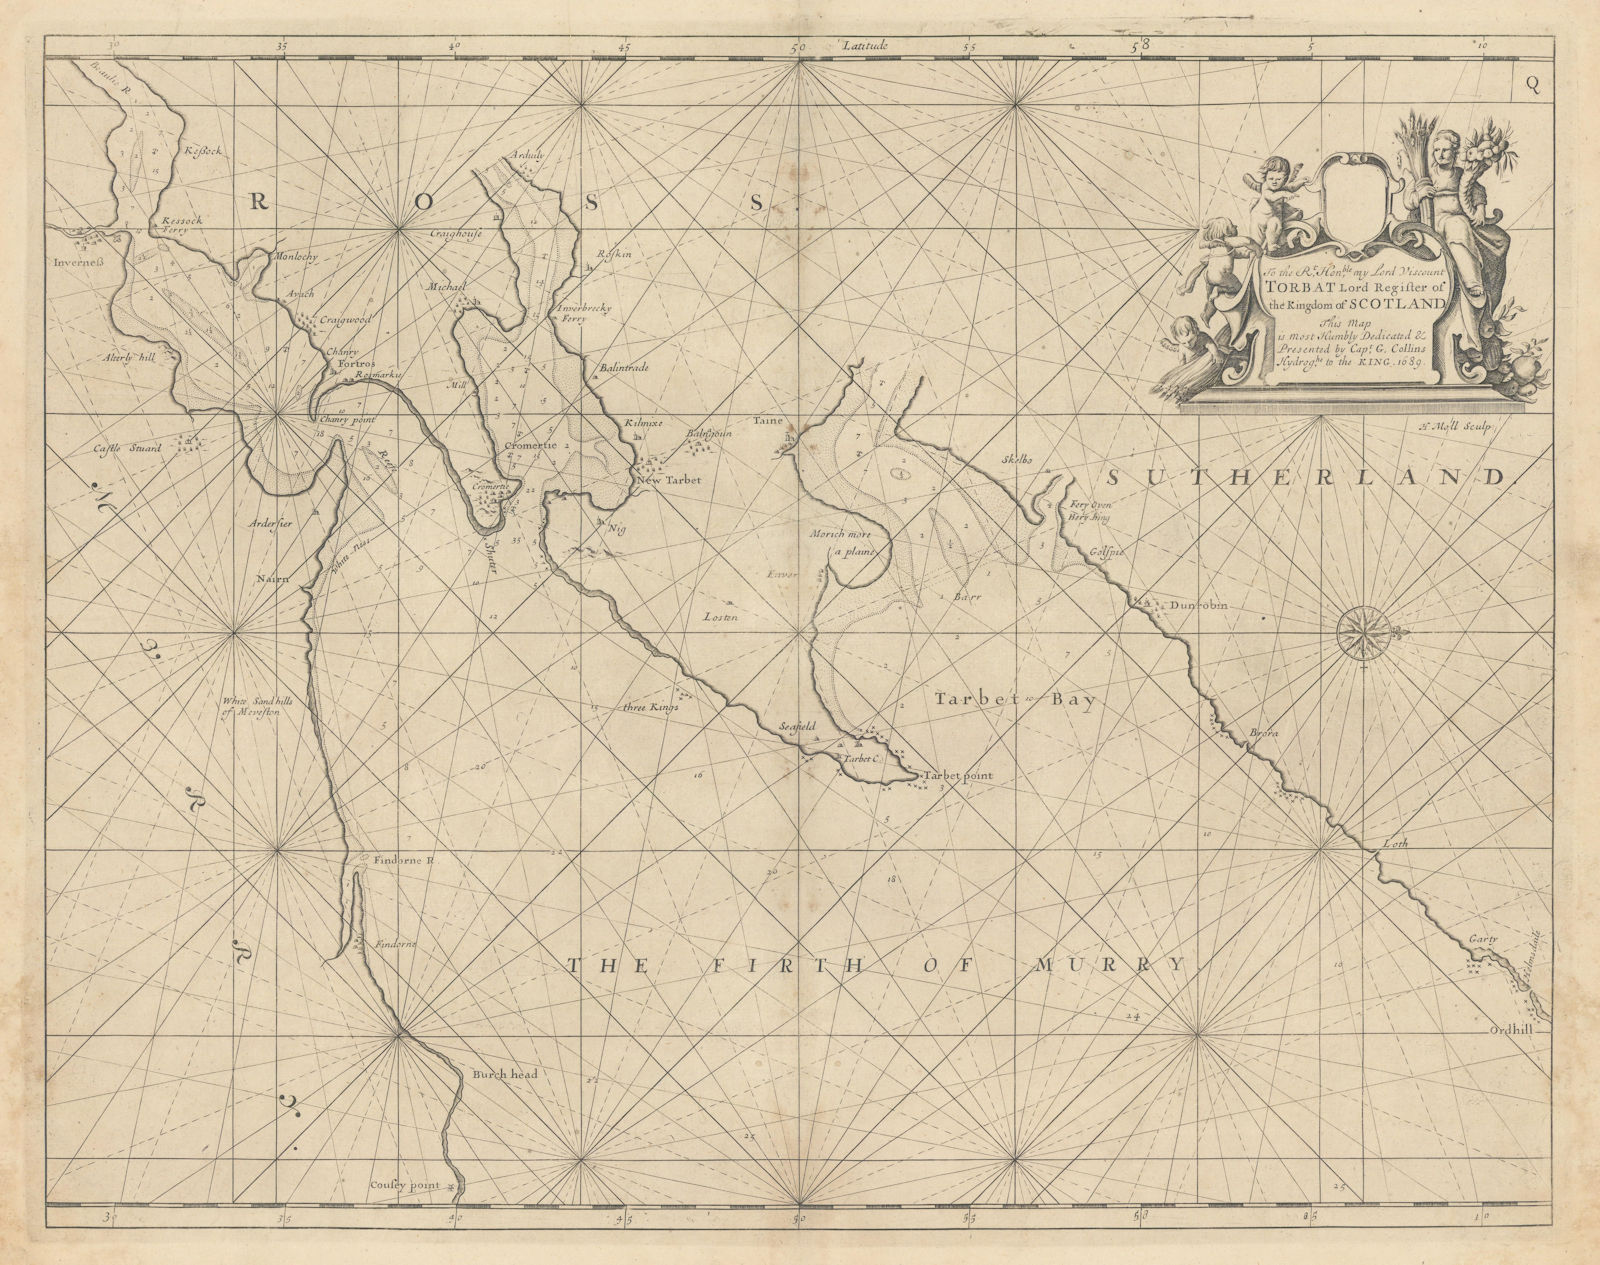 Associate Product Firth of Murry. MORAY FIRTH sea chart Inverness Cromarty. COLLINS 1723 old map